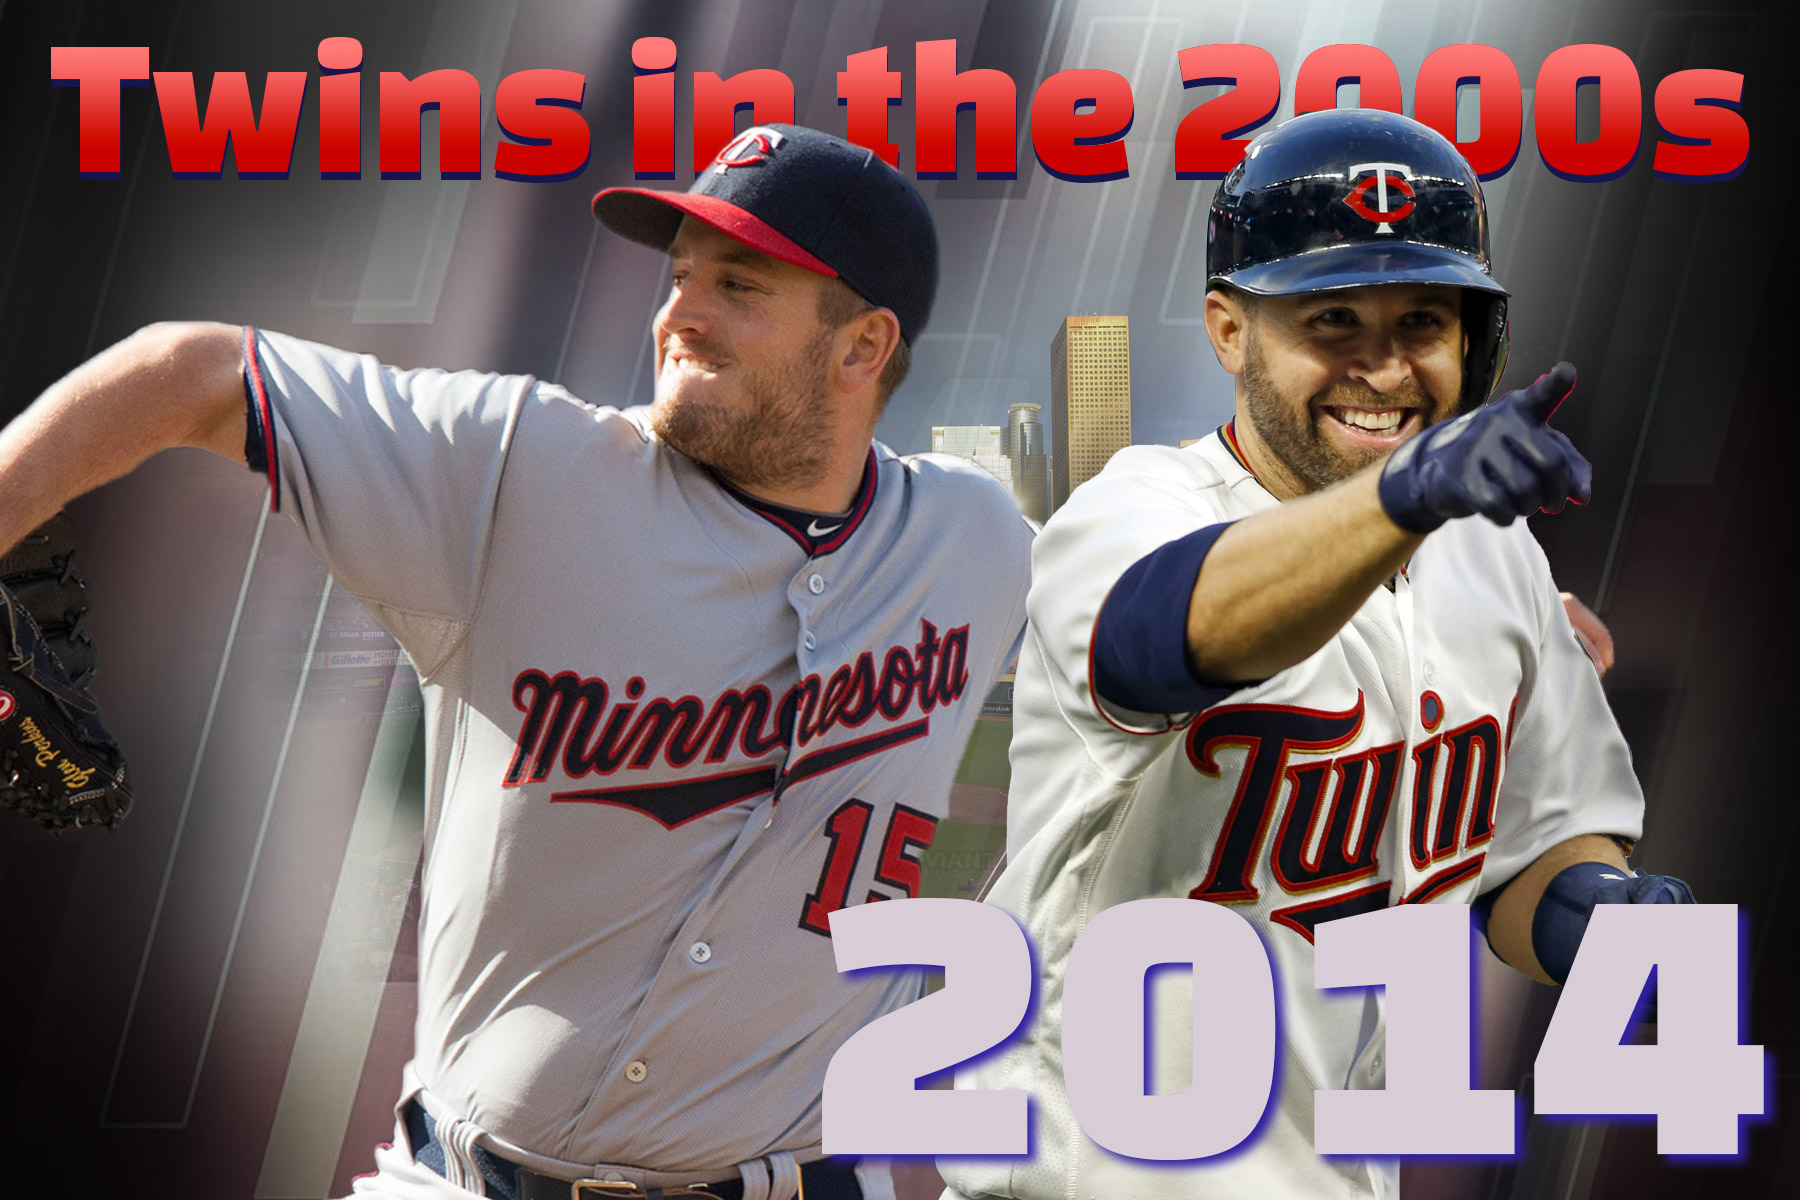 Mauer's move to first impacts 2014 catcher rankings